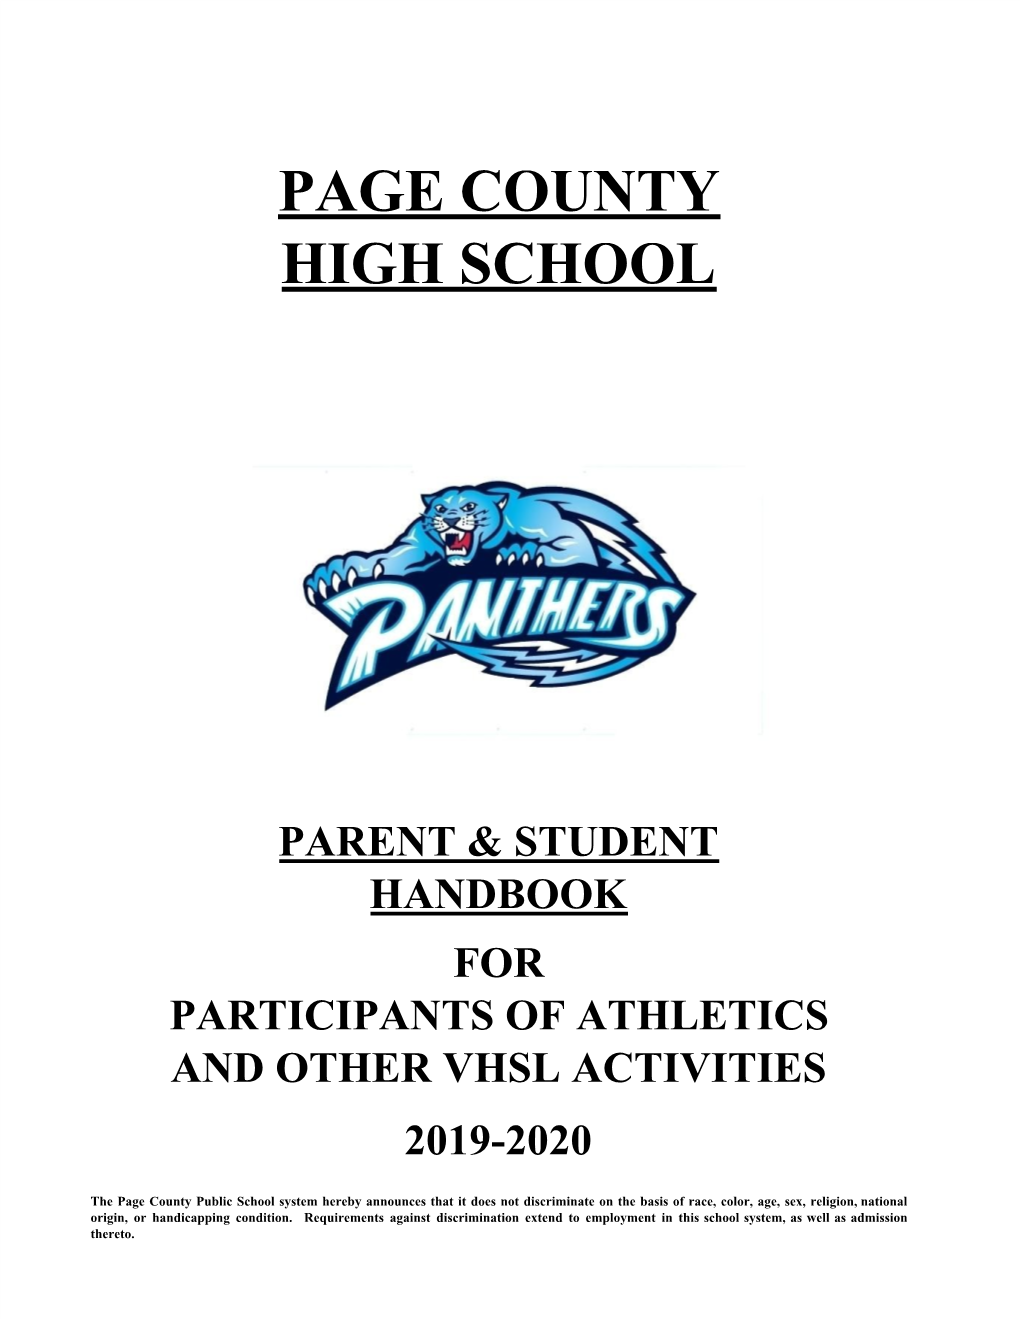 Page County High School Athletics and Other Vhsl Activities!